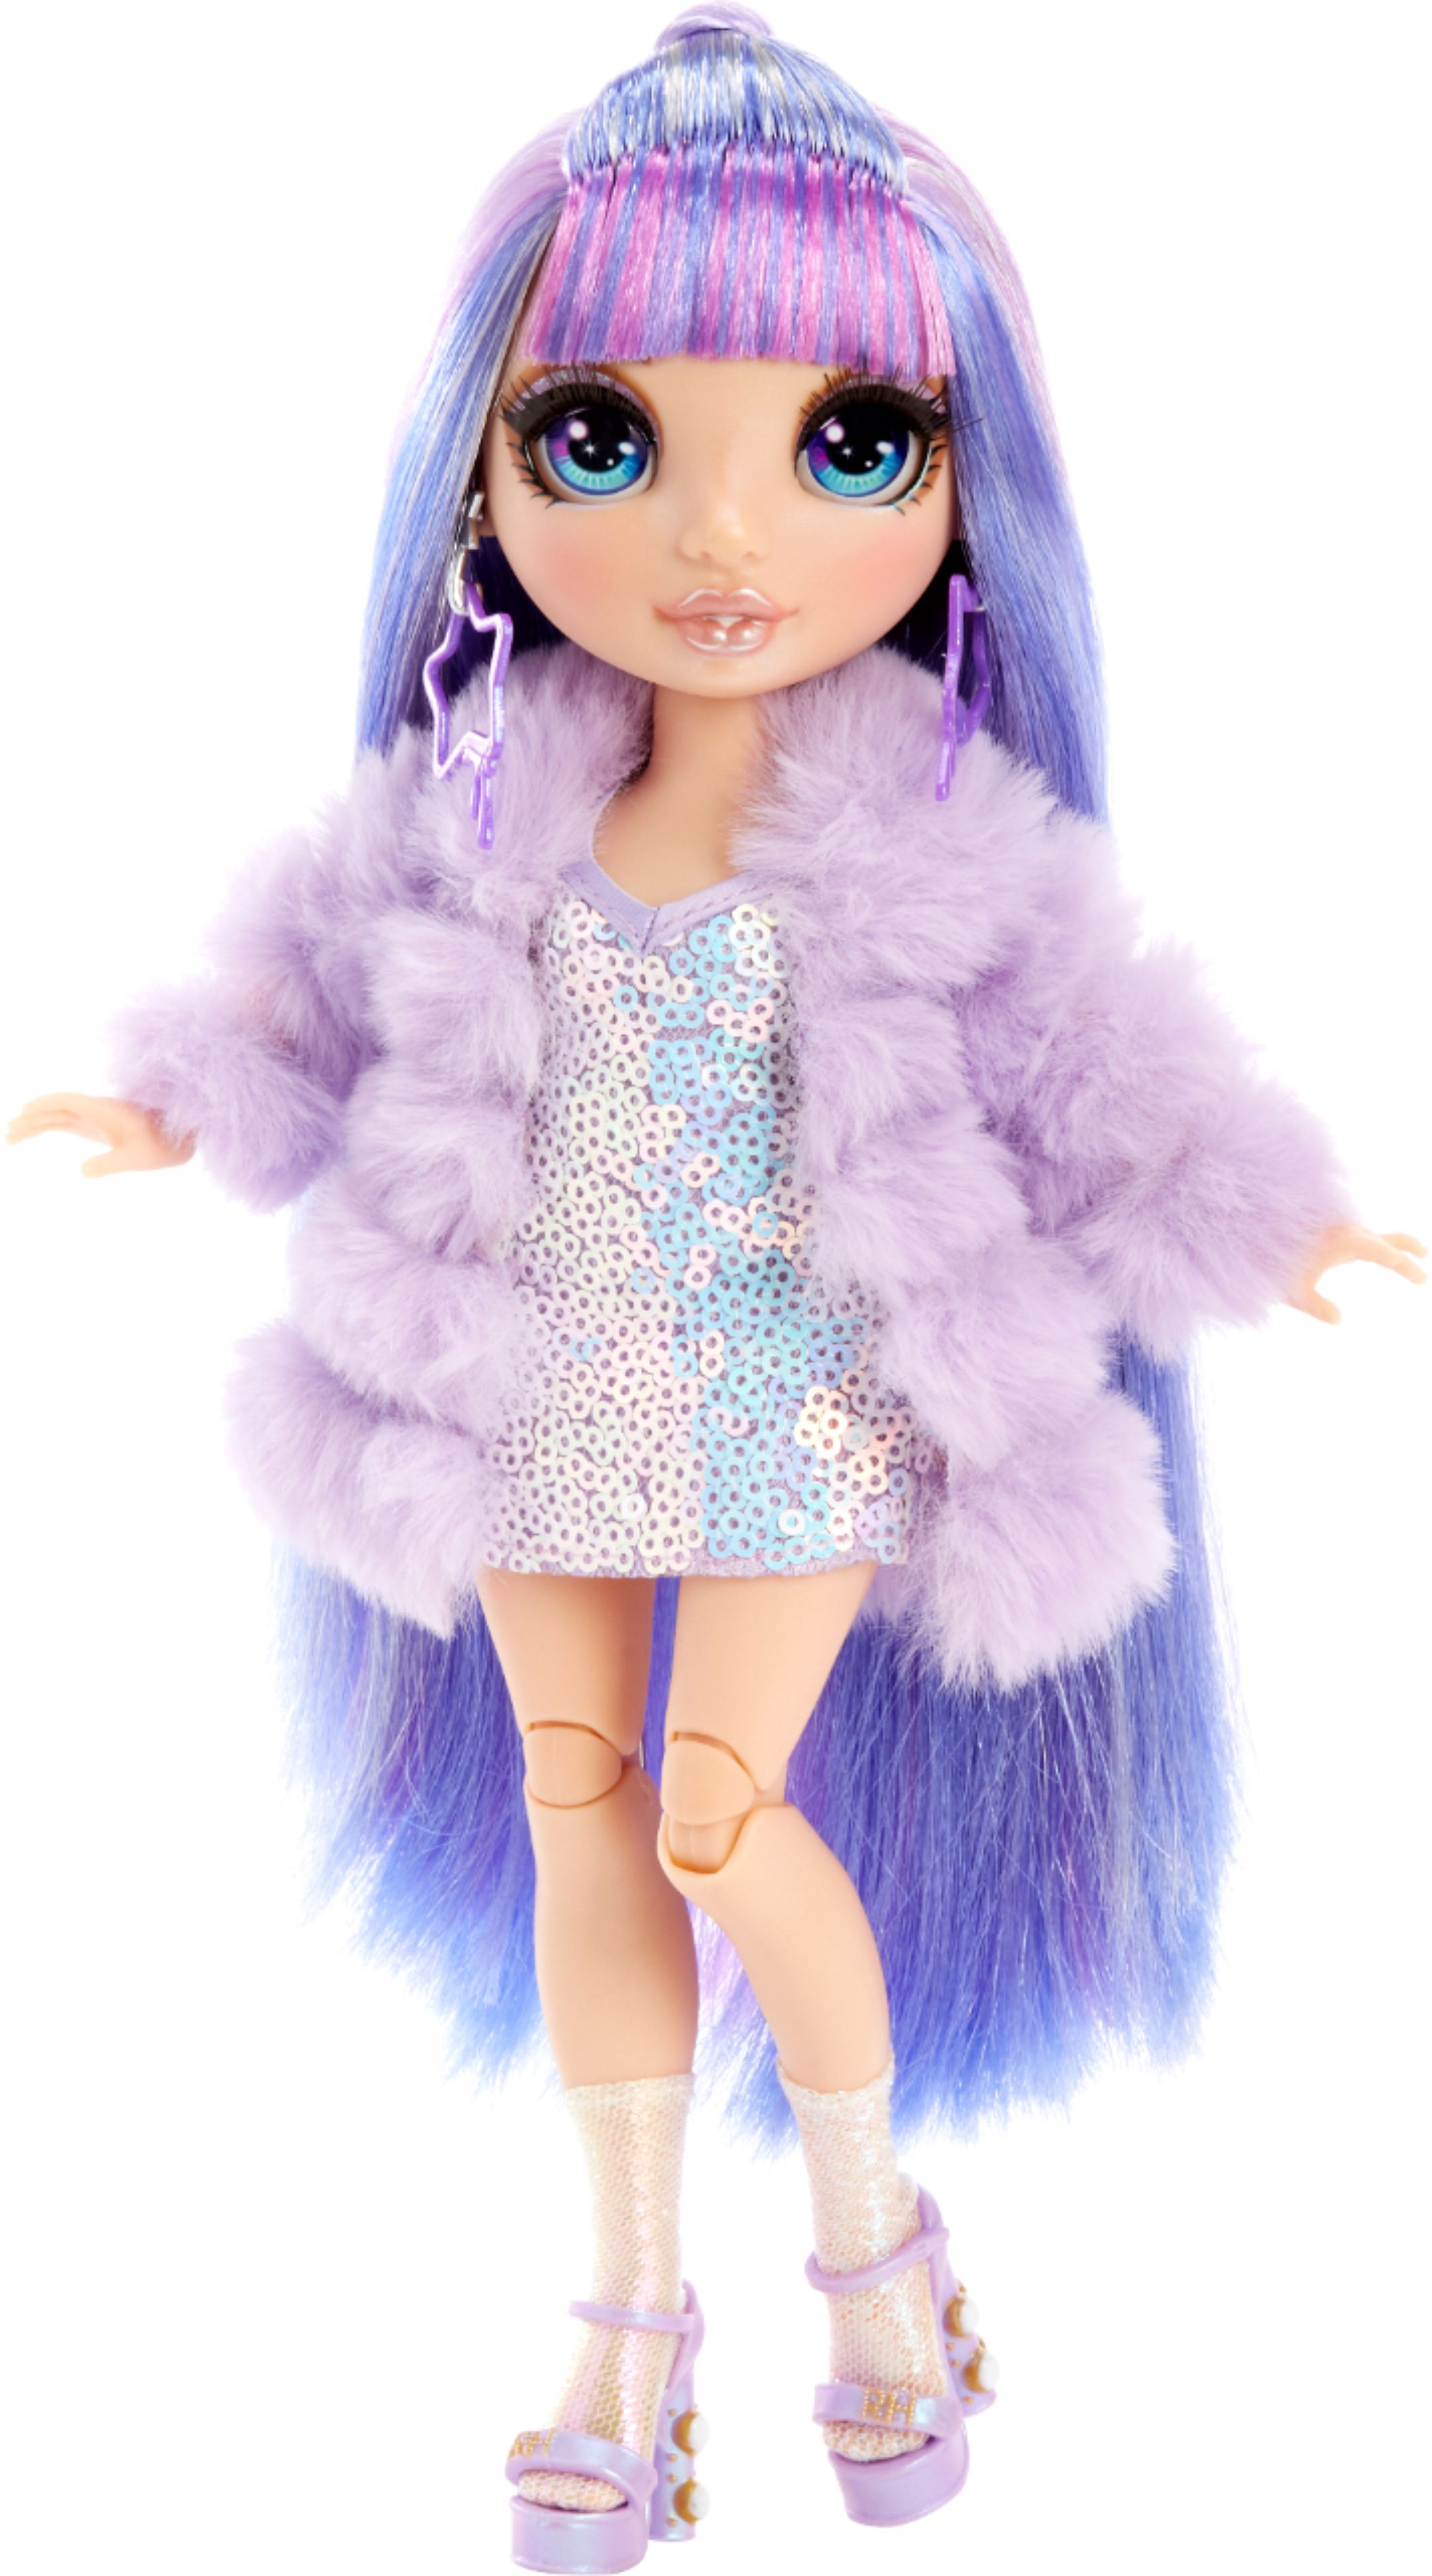 569602 for sale online Rainbow High High Violet Willow Fashion Doll